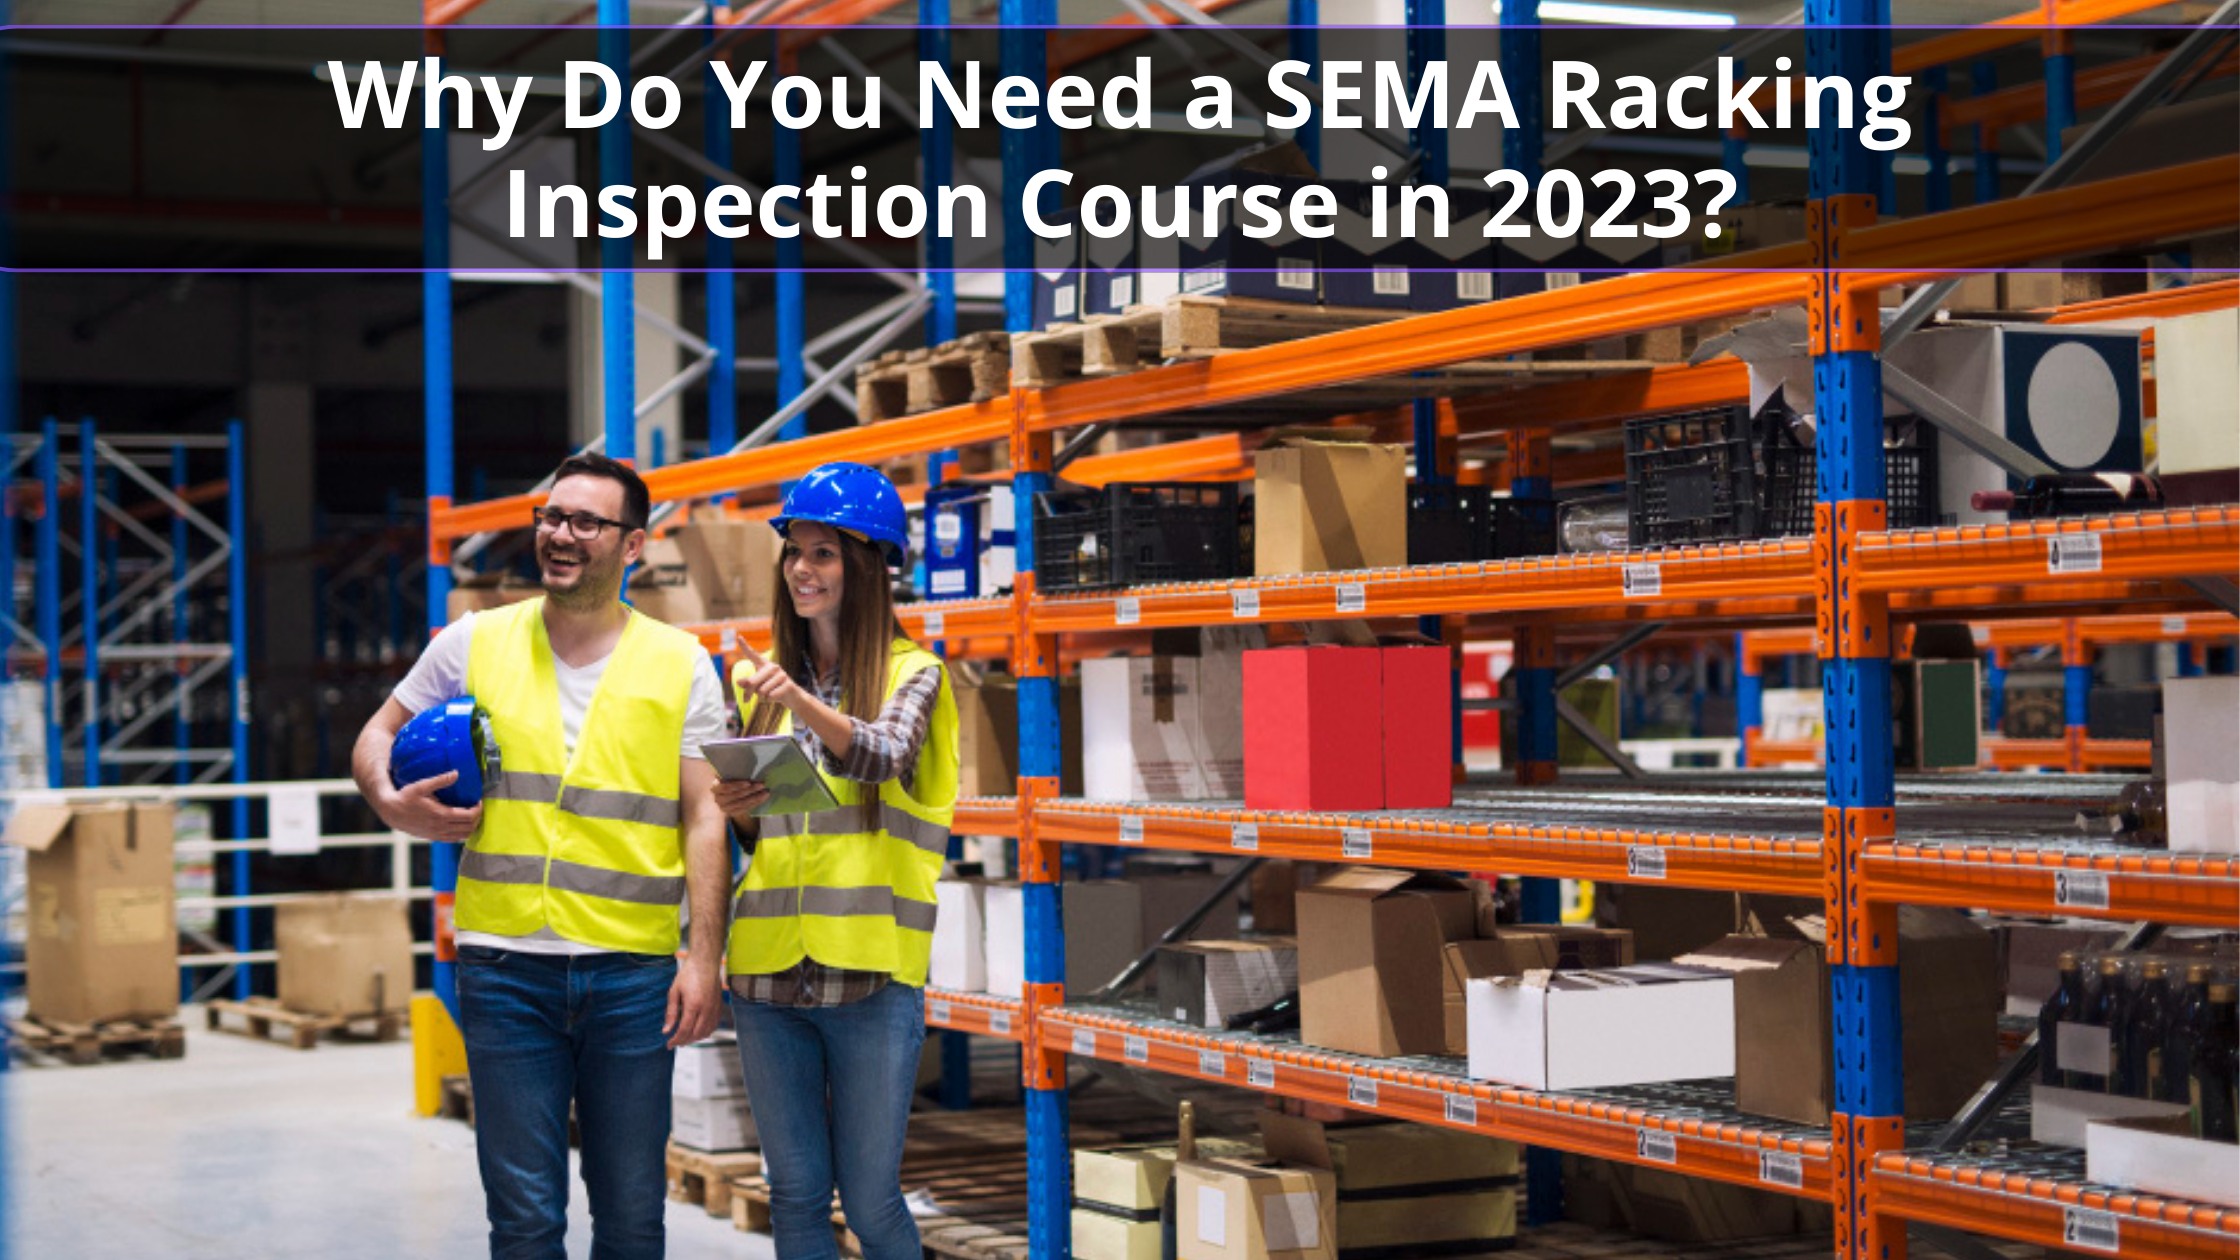 Why Do You Need a SEMA Racking Inspection Course 2023